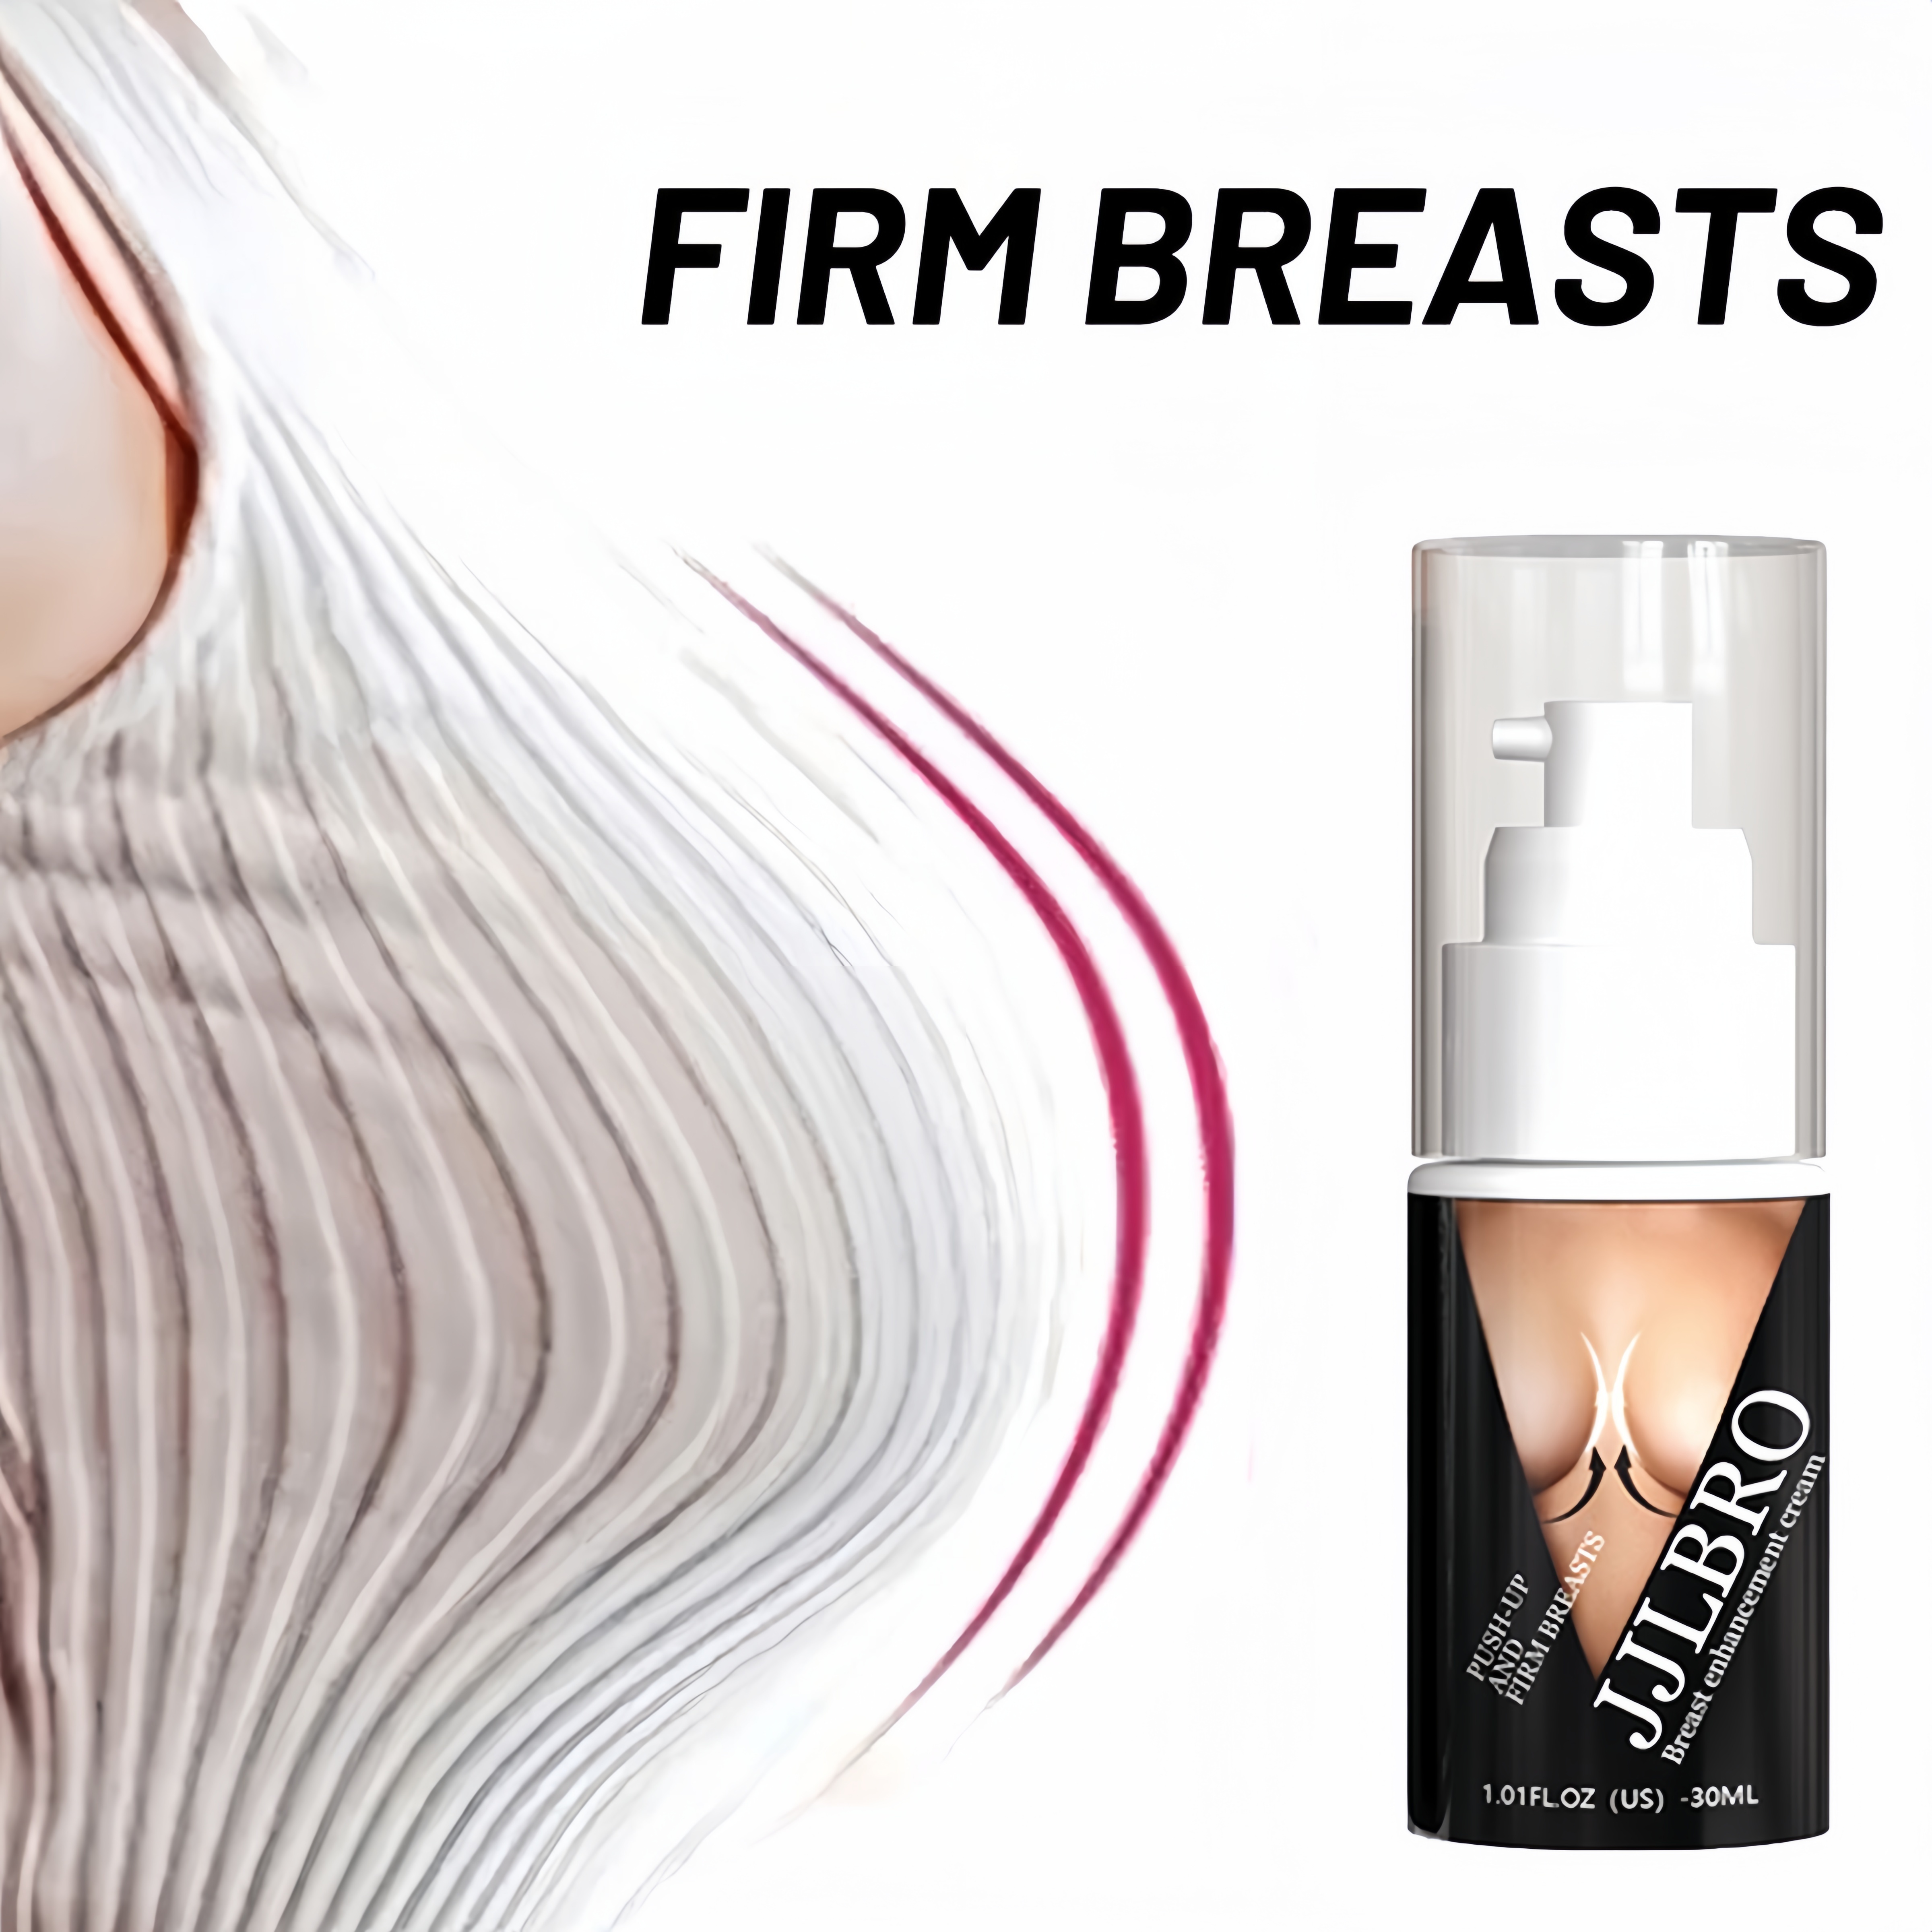 Mygater H Breast Enlargement Caps Size Increase Growth Boobs Effective Bust  Full 36 Massage Tightening Tight